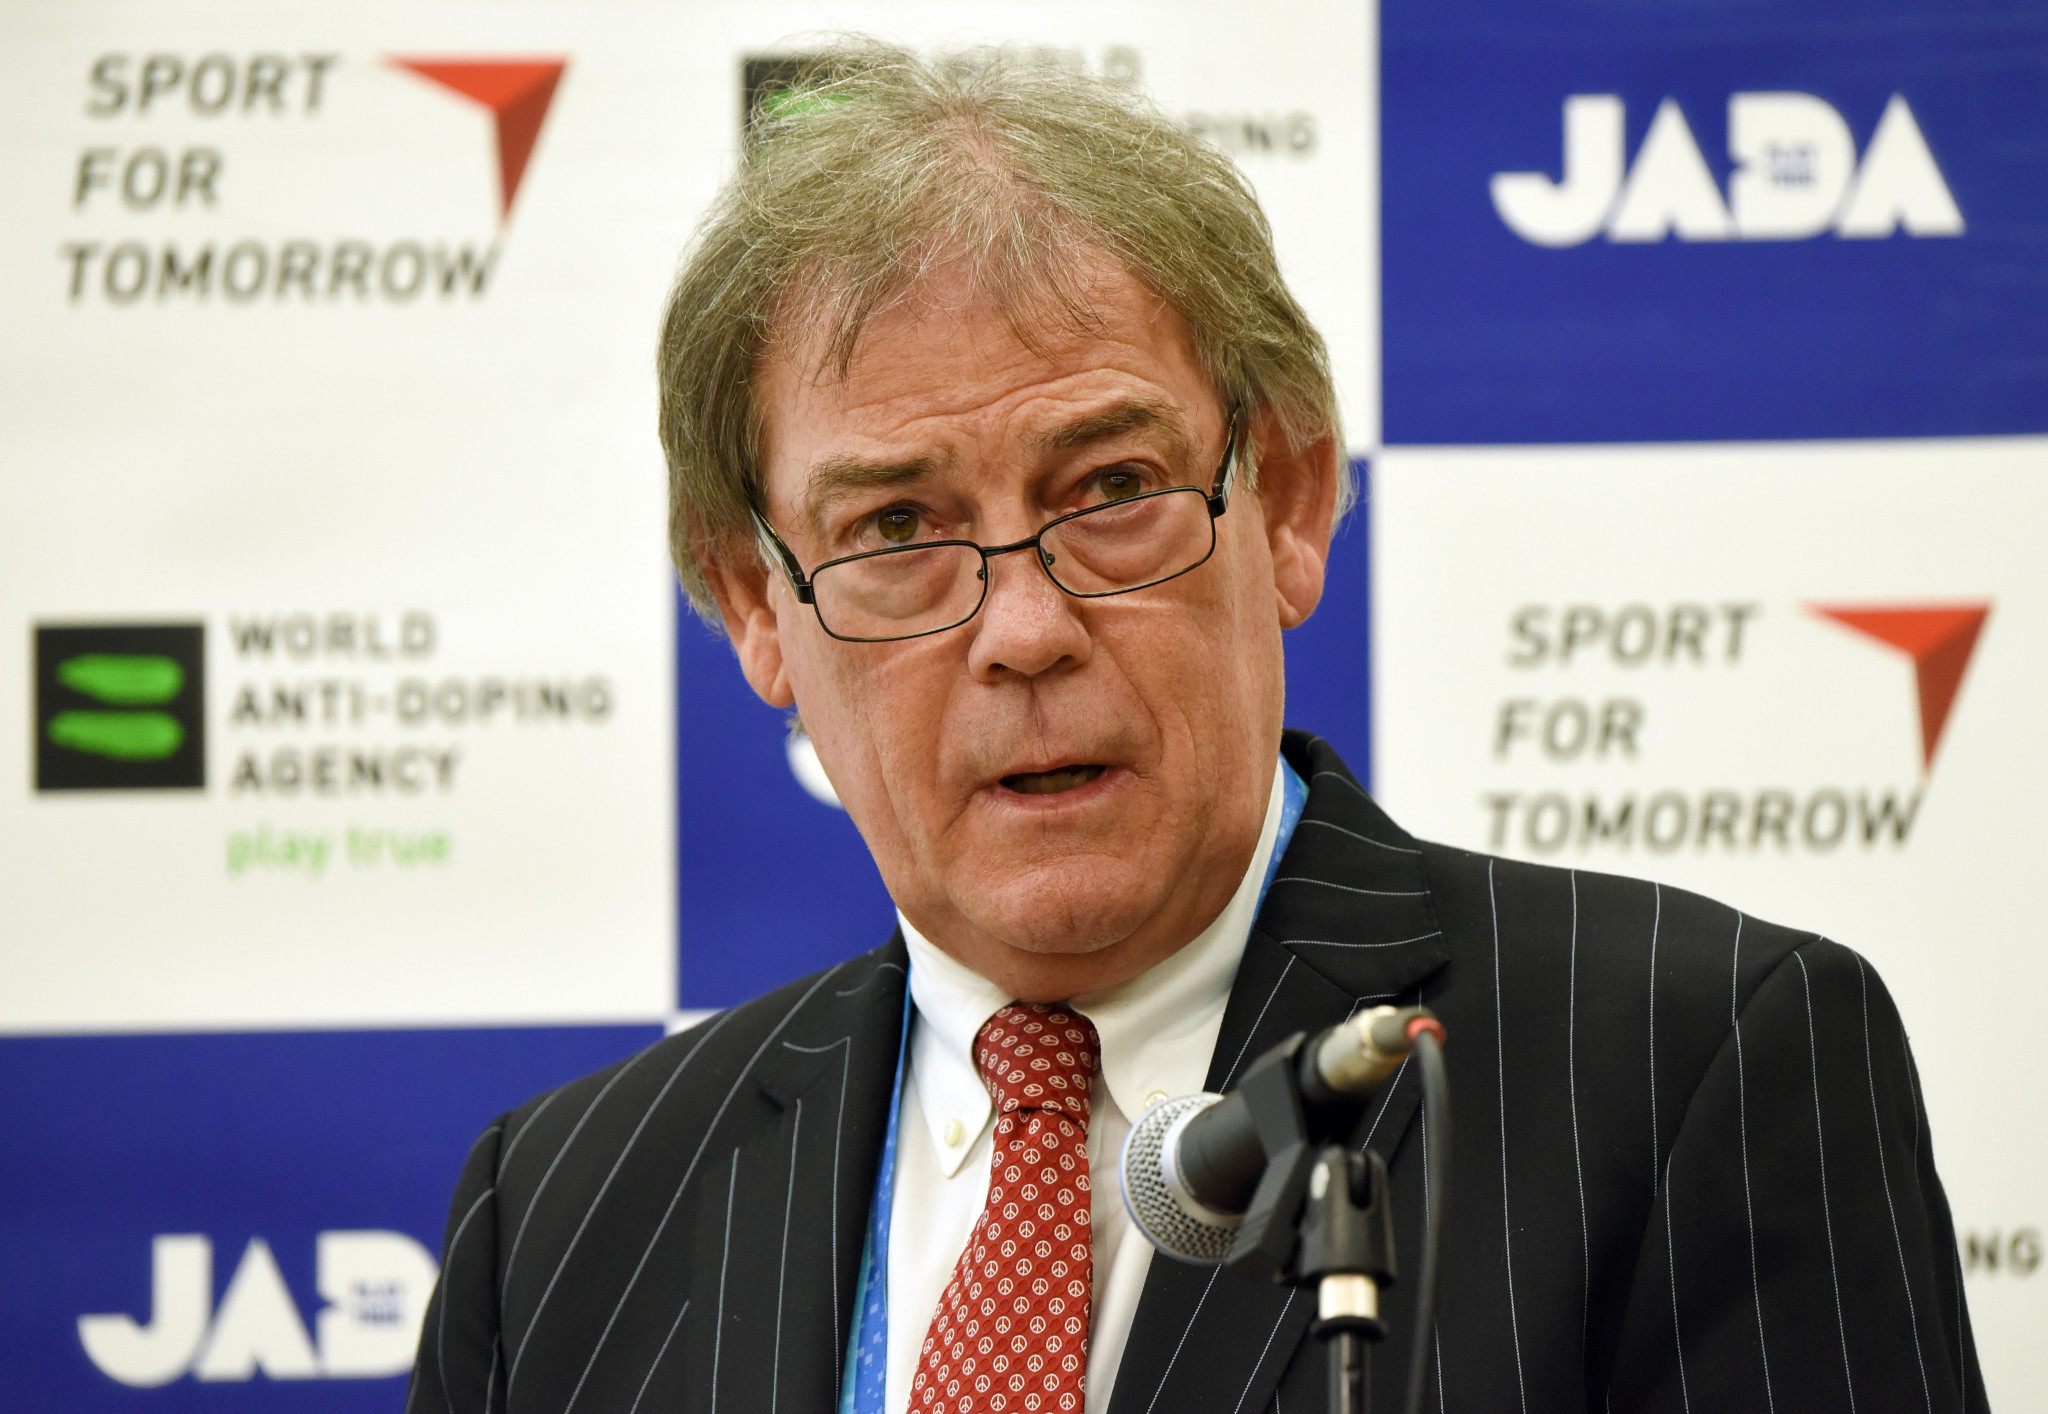 Former WADA director general and current Athletics Integrity Unit chairman David Howman is set to provide a keynote address at the Partnership for Clean Competition conference in London ©Getty Images